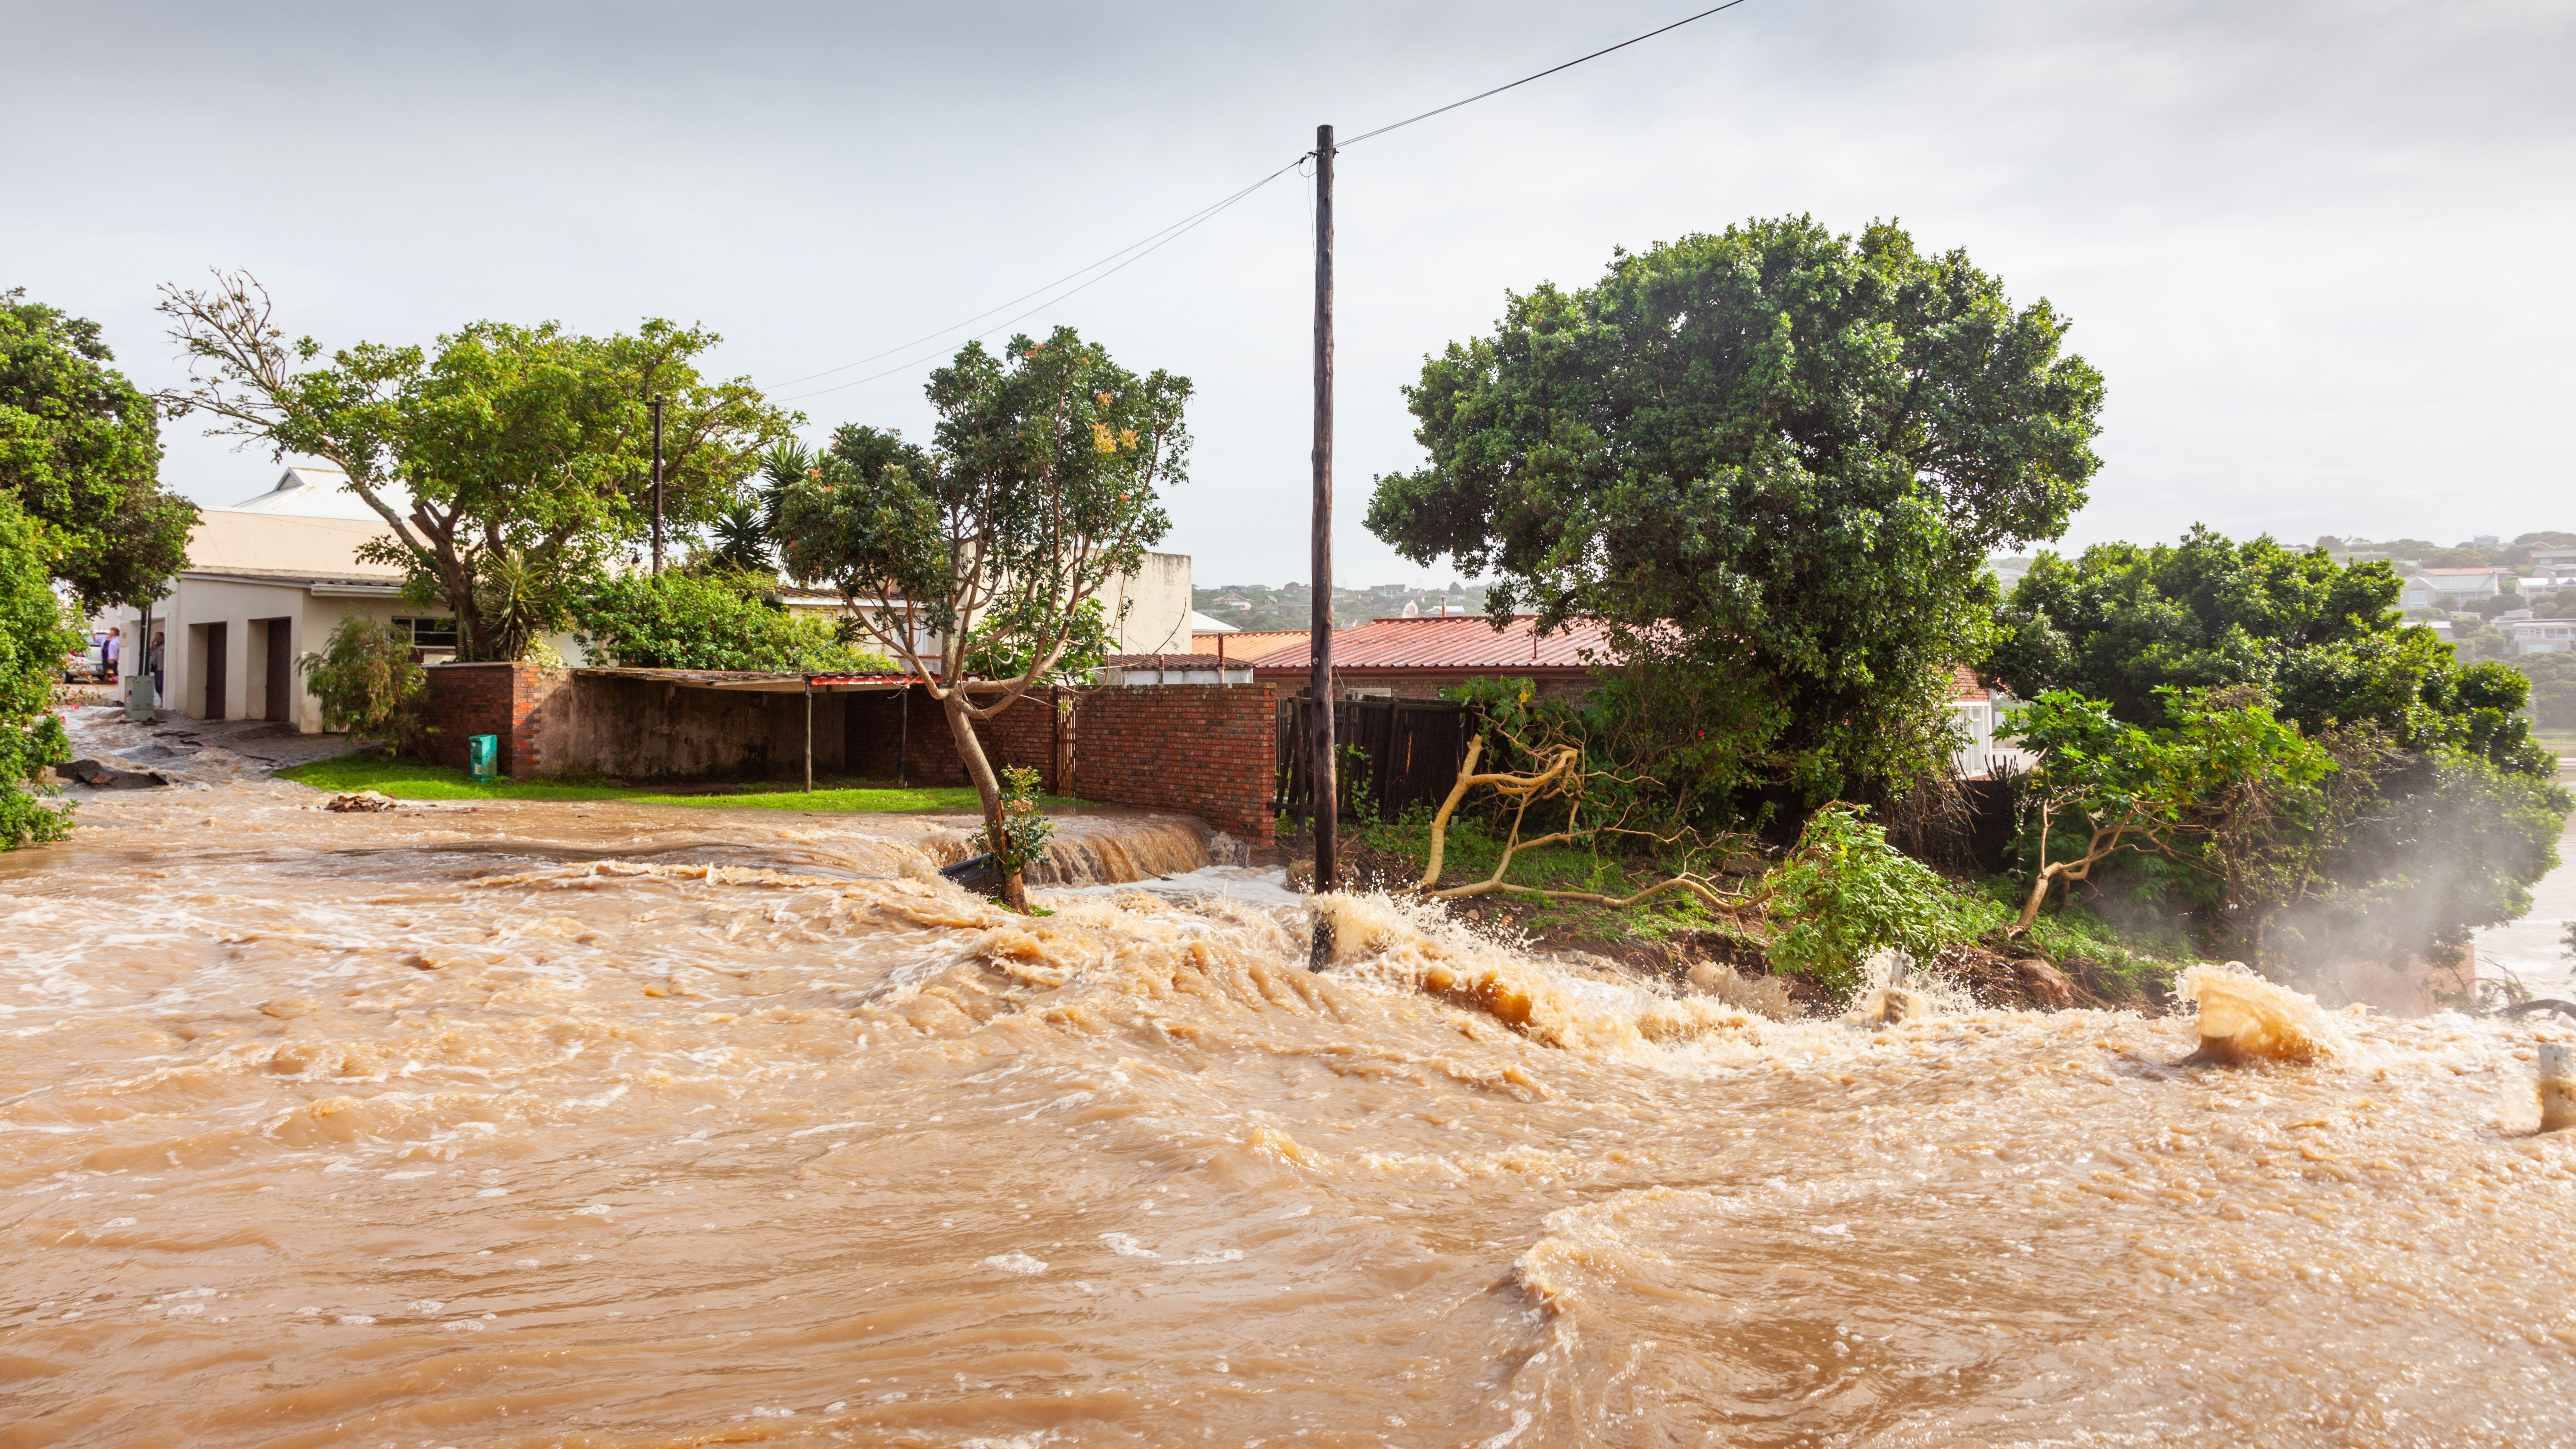 Floodwaters in the town of Bushmans River in the Eastern Cape of South Africa